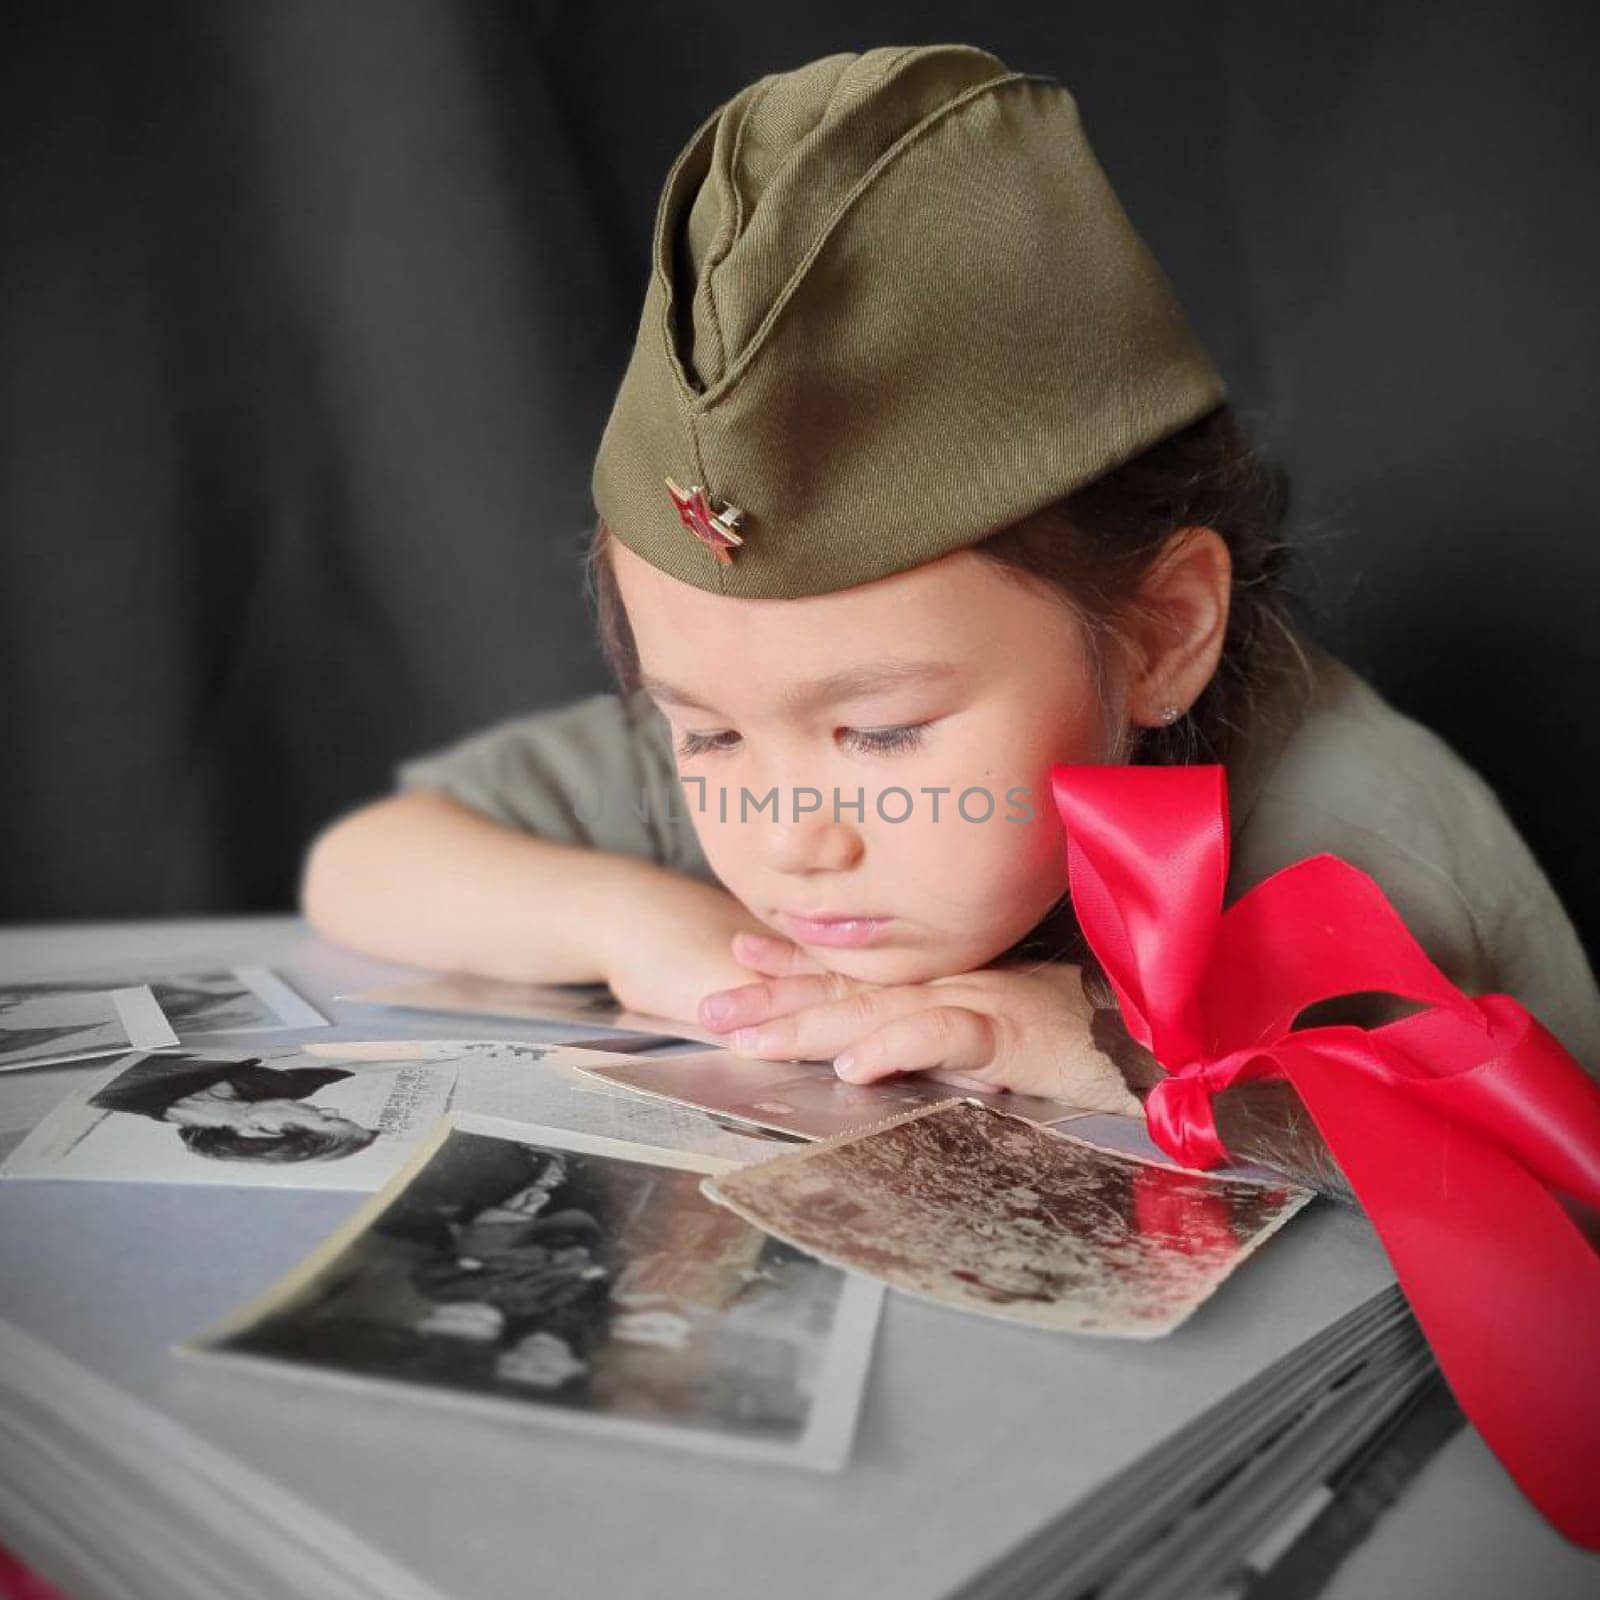 A little girl in a military uniform with two pigtails and red bows is looking at an album with photographs. Portrait photo for Victory Day. 9th May by TatyanaTrushcheleva